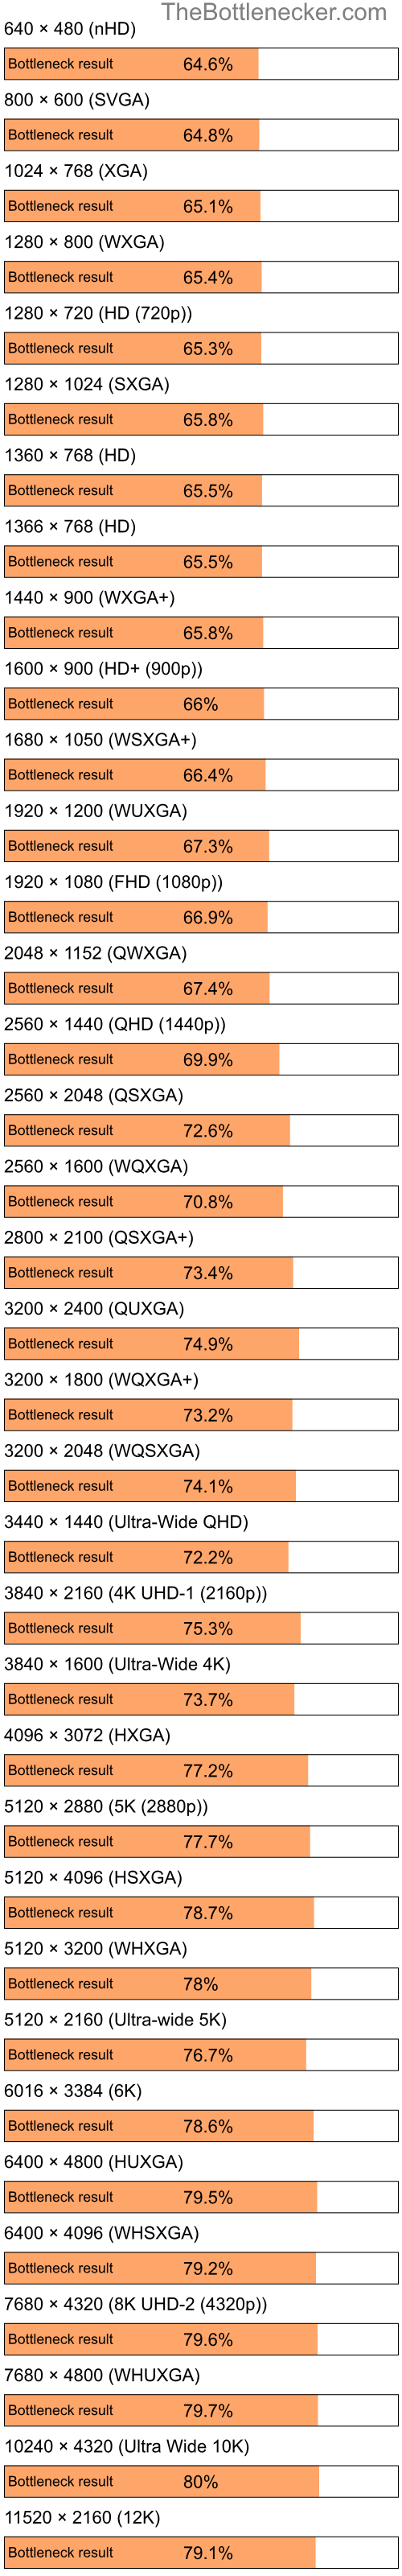 Bottleneck results by resolution for Intel Pentium 4 and AMD Radeon HD 7290 in Graphic Card Intense Tasks